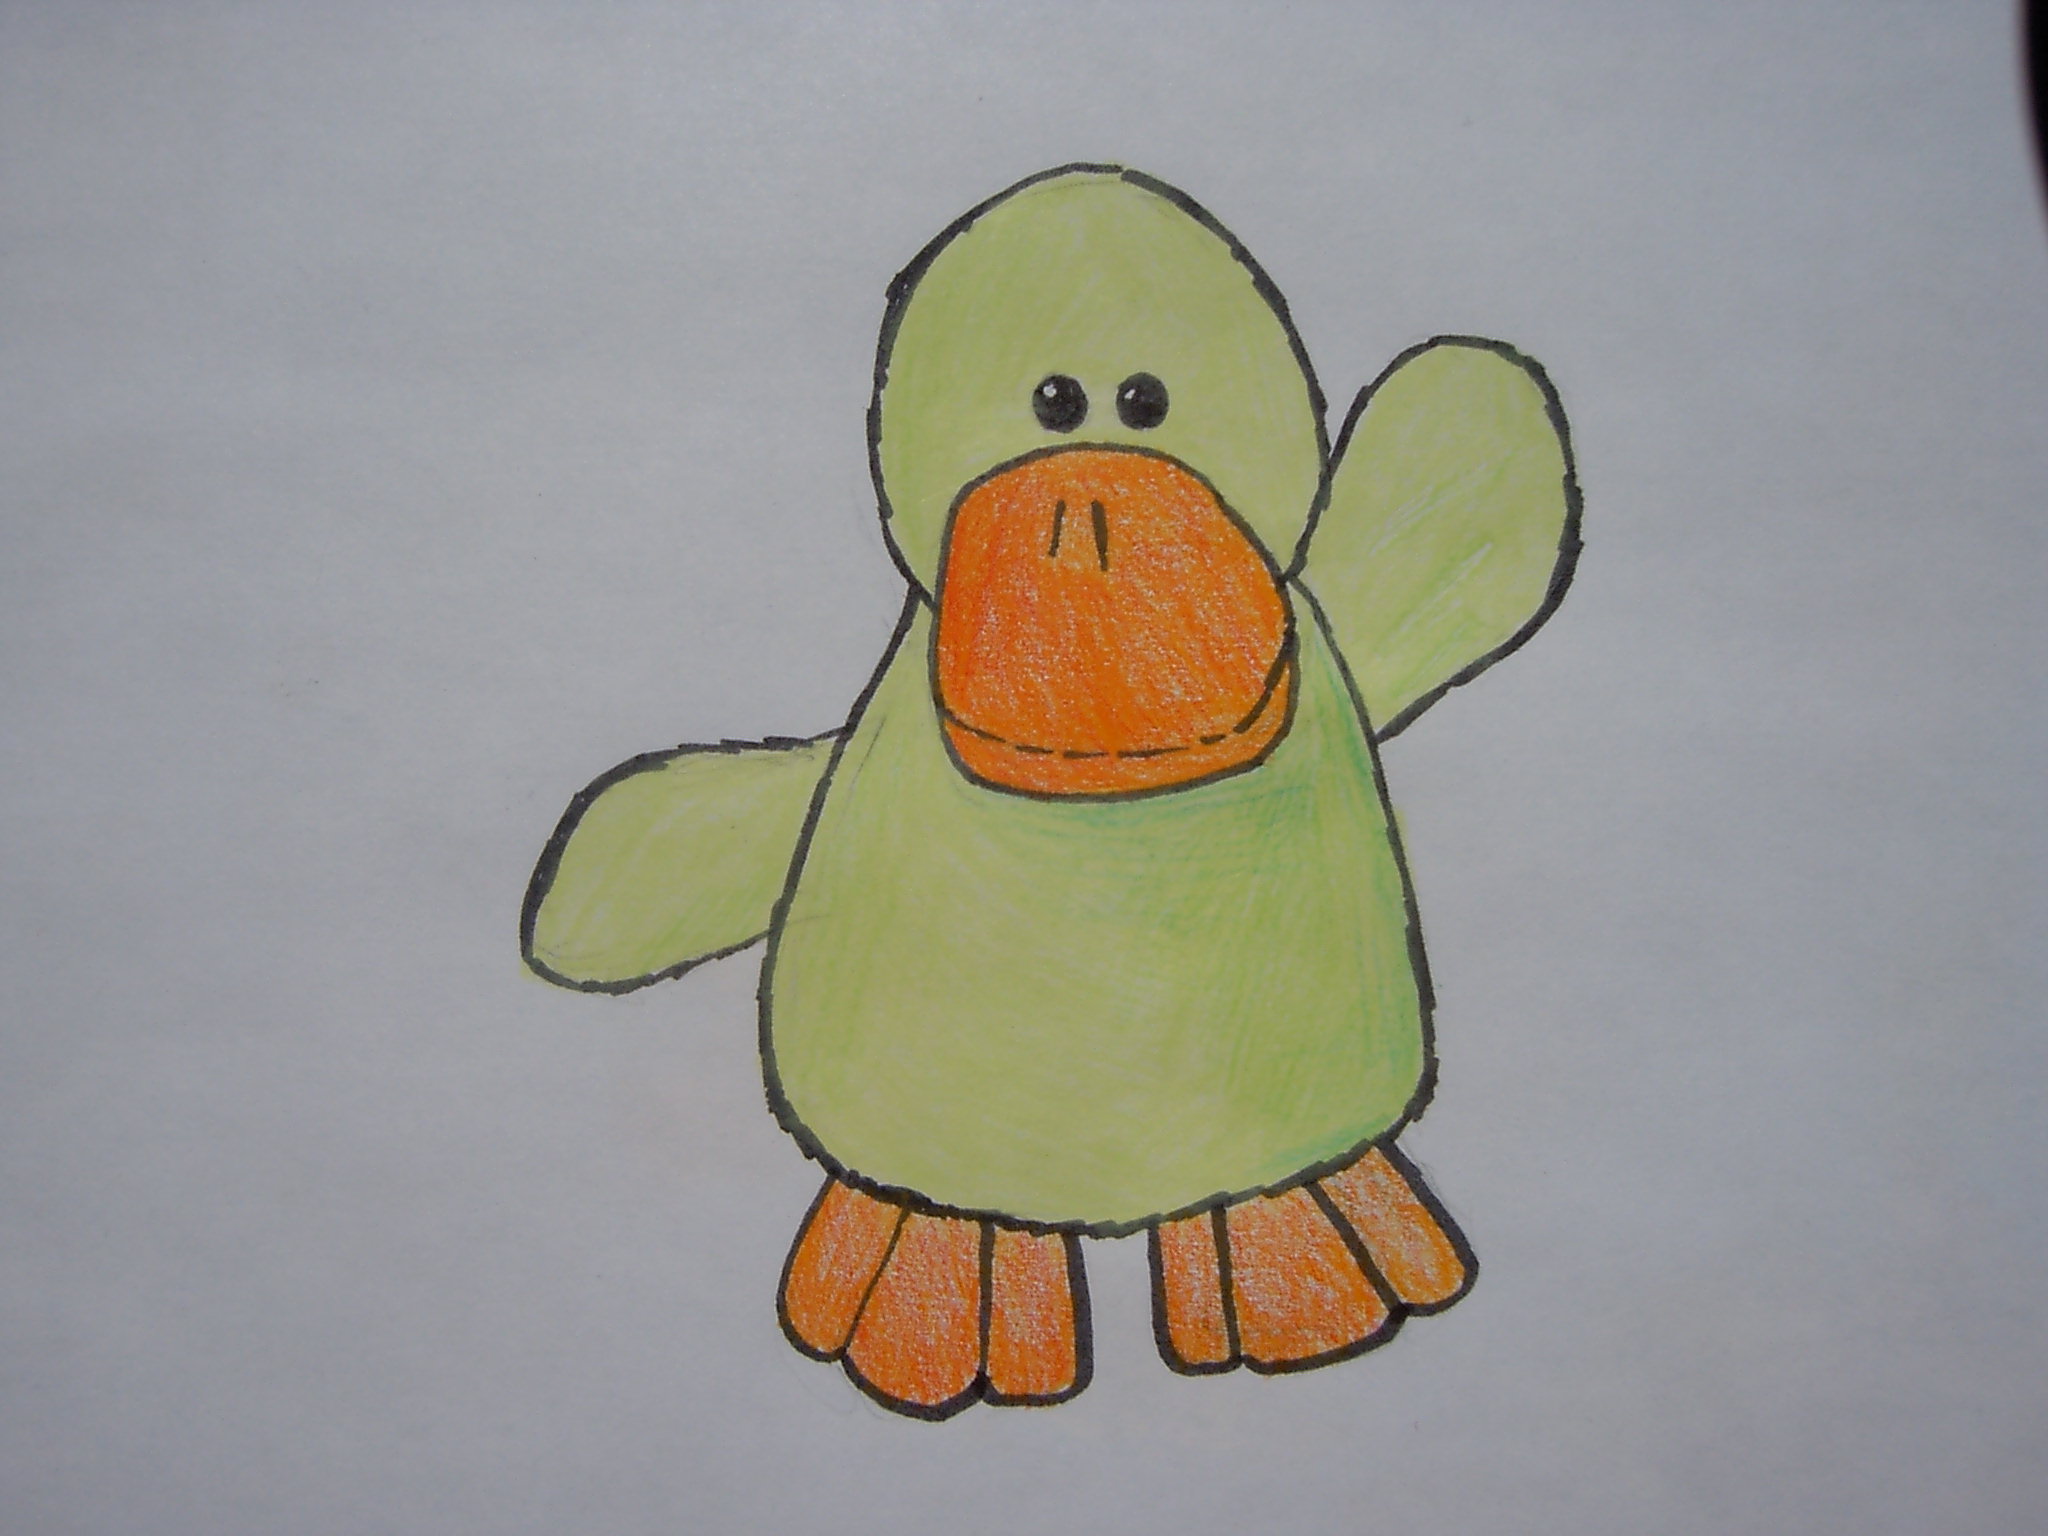 My soft duck toy" by kockanock